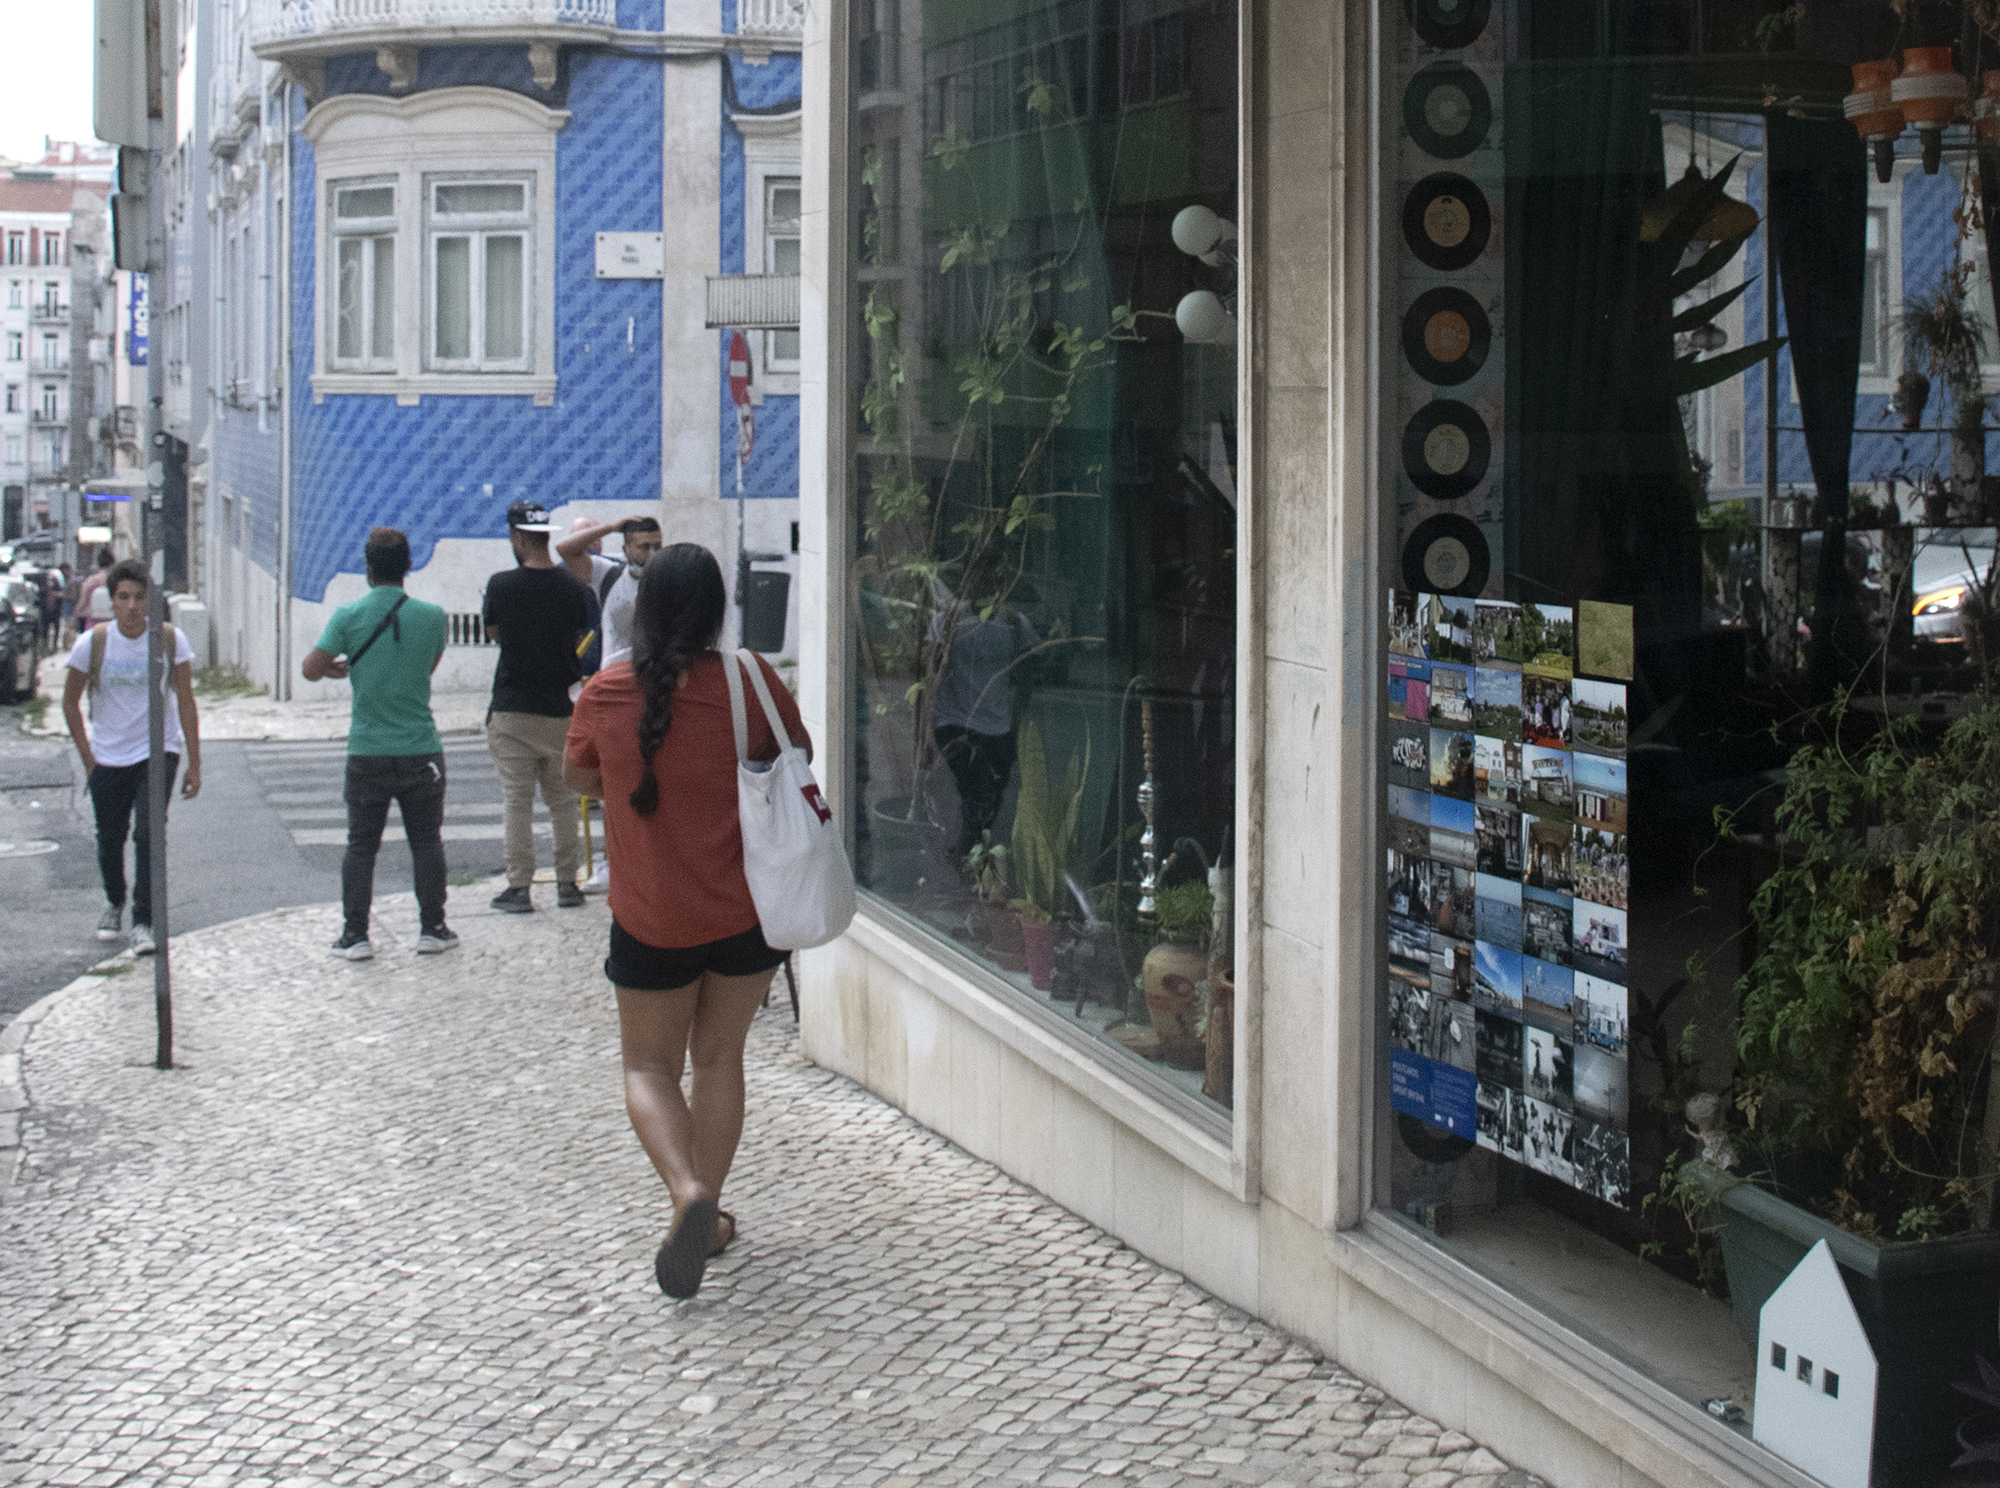 A street in Lisbon, Portugal. In one of the shop windows there is an exhibition of Shutter Hubs Postcards from Great Britain project, lots of postcard sized photographs